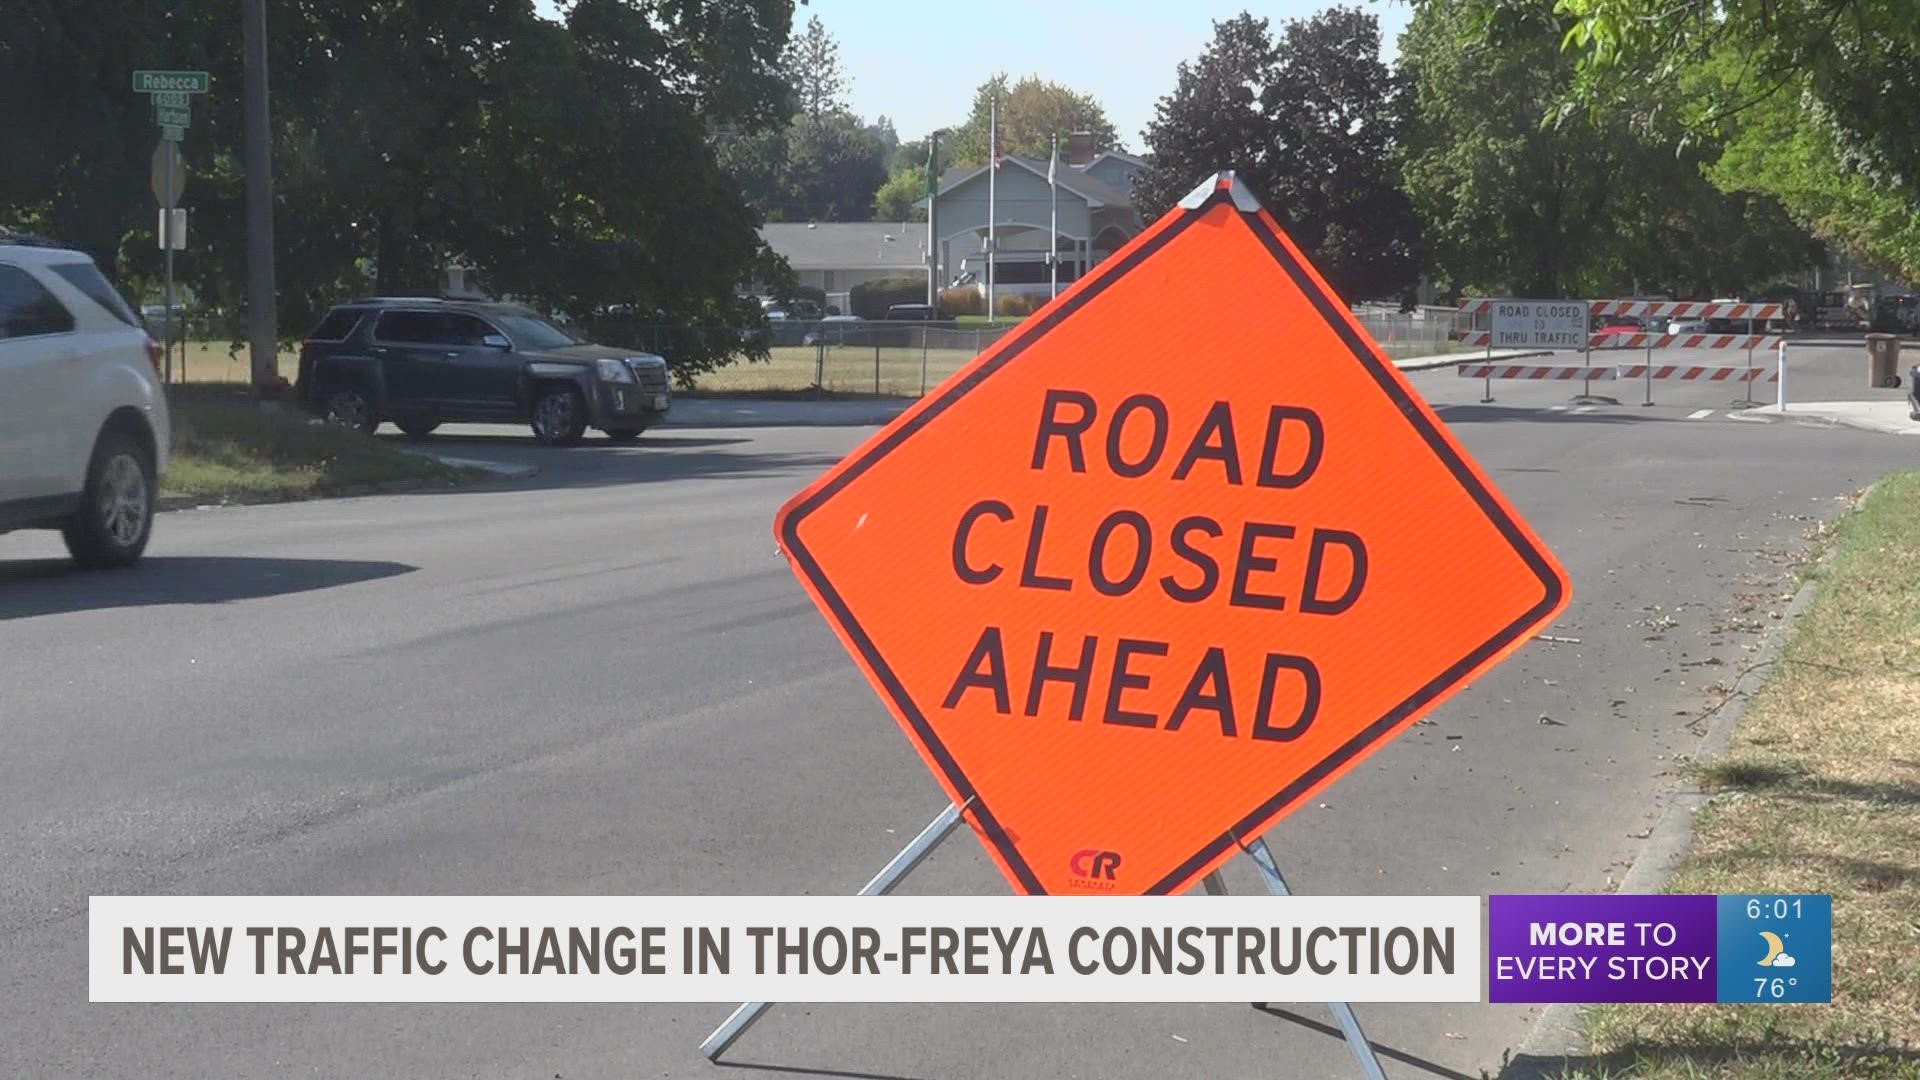 Now the intersection of Freya and Hartson will be closed to traffic and traffic will be rerouted. All traffic will detour down 8th.